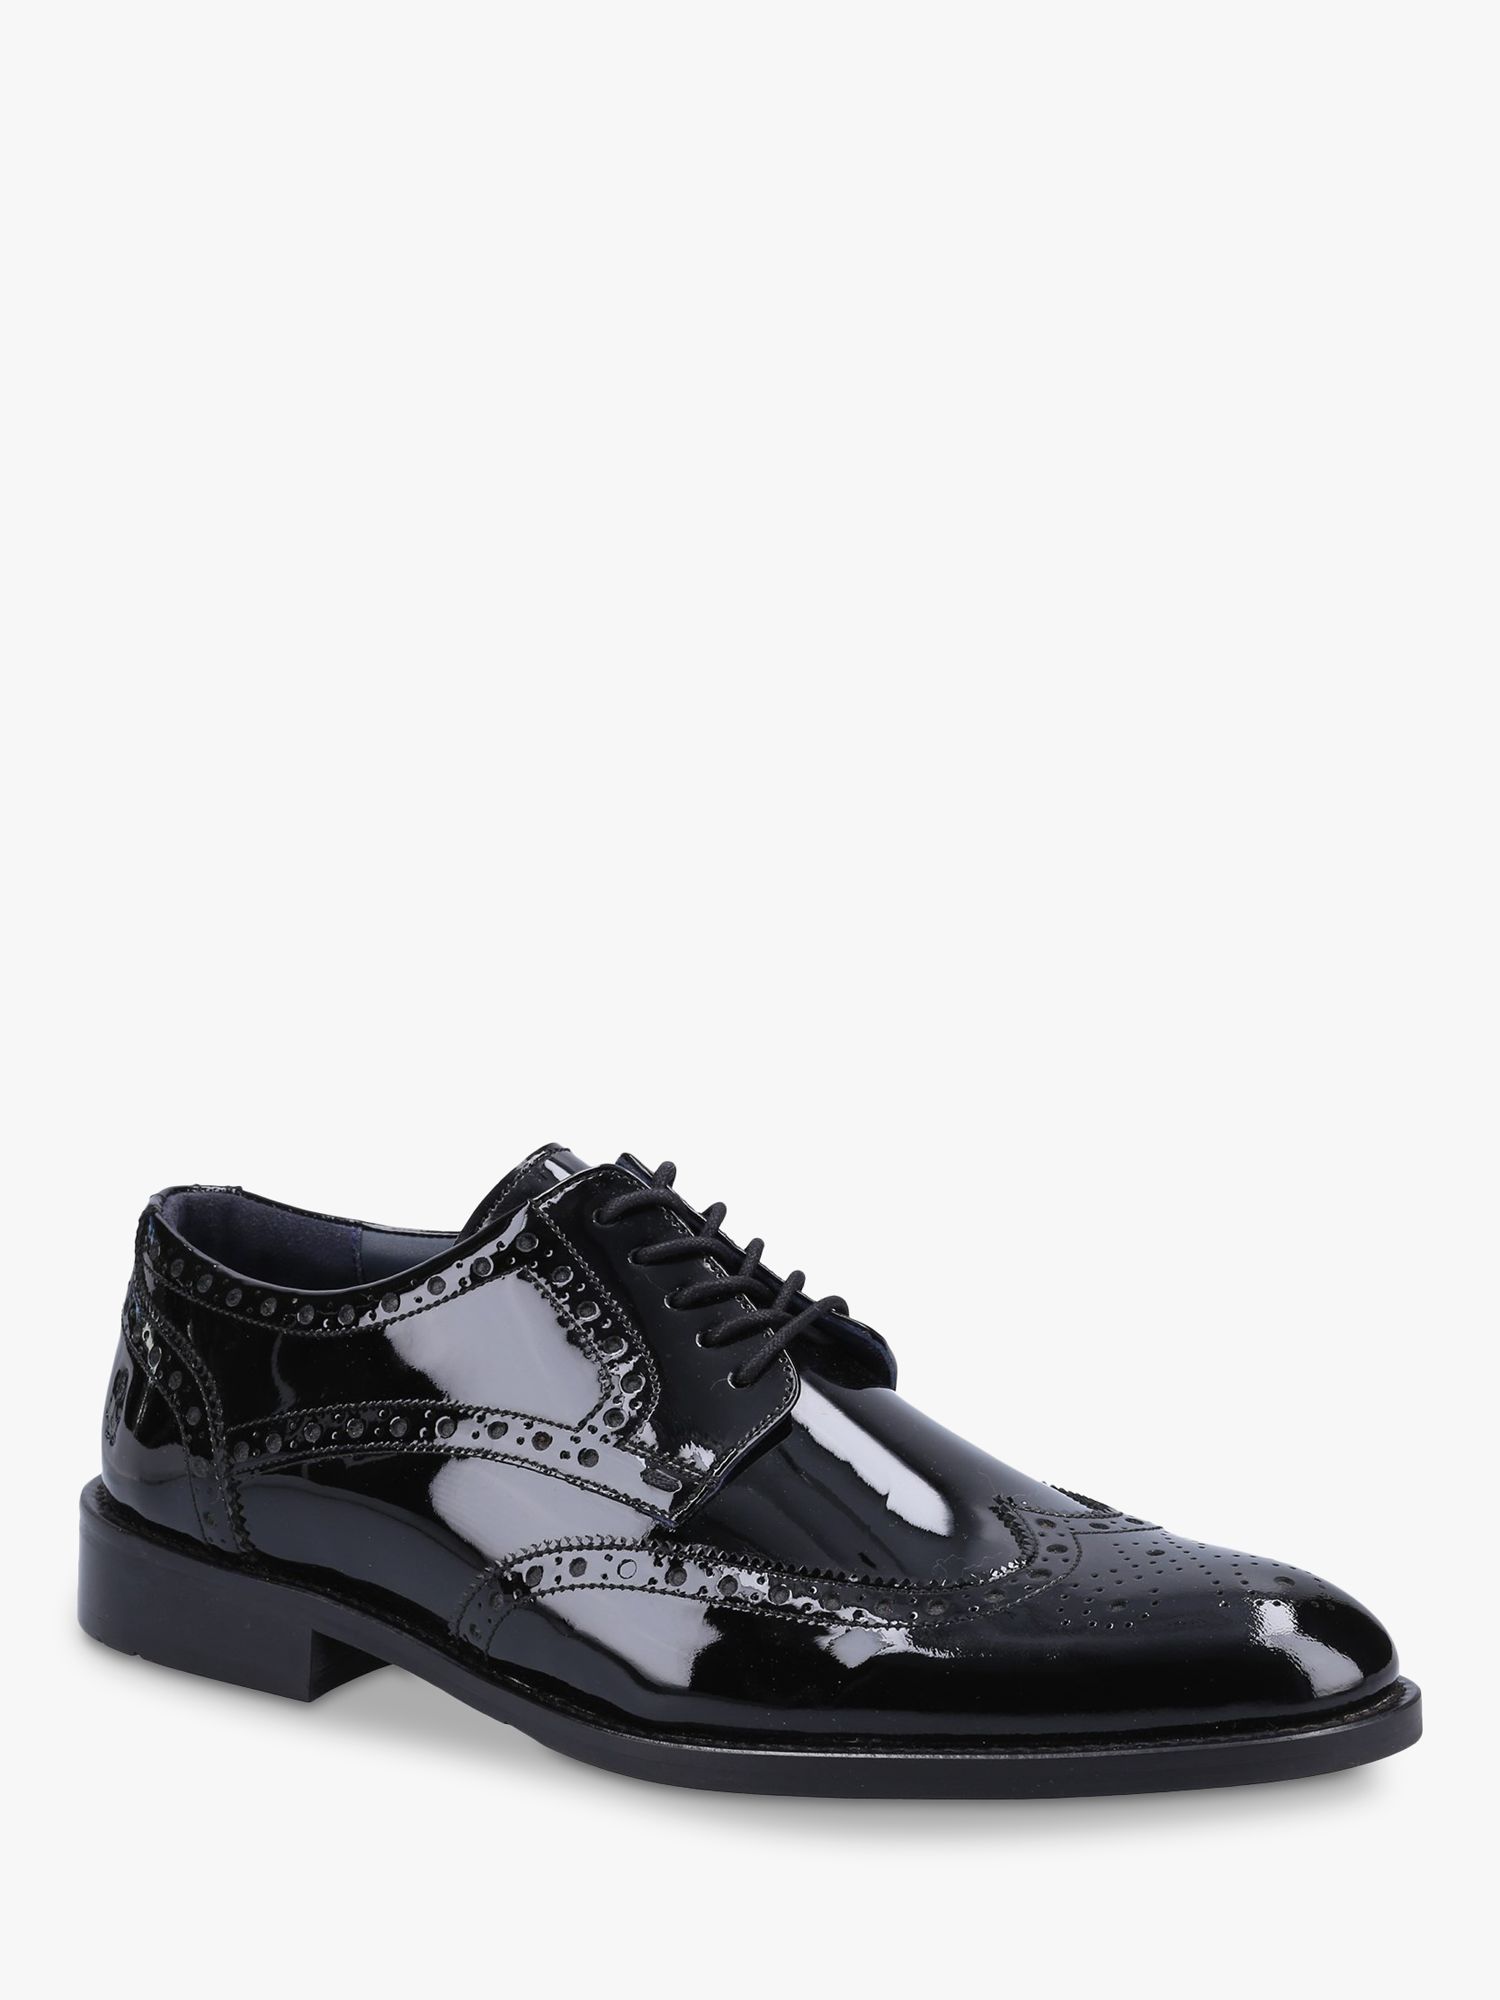 Buy Hush Puppies Dustin Patent Leather Brogues, Black Online at johnlewis.com